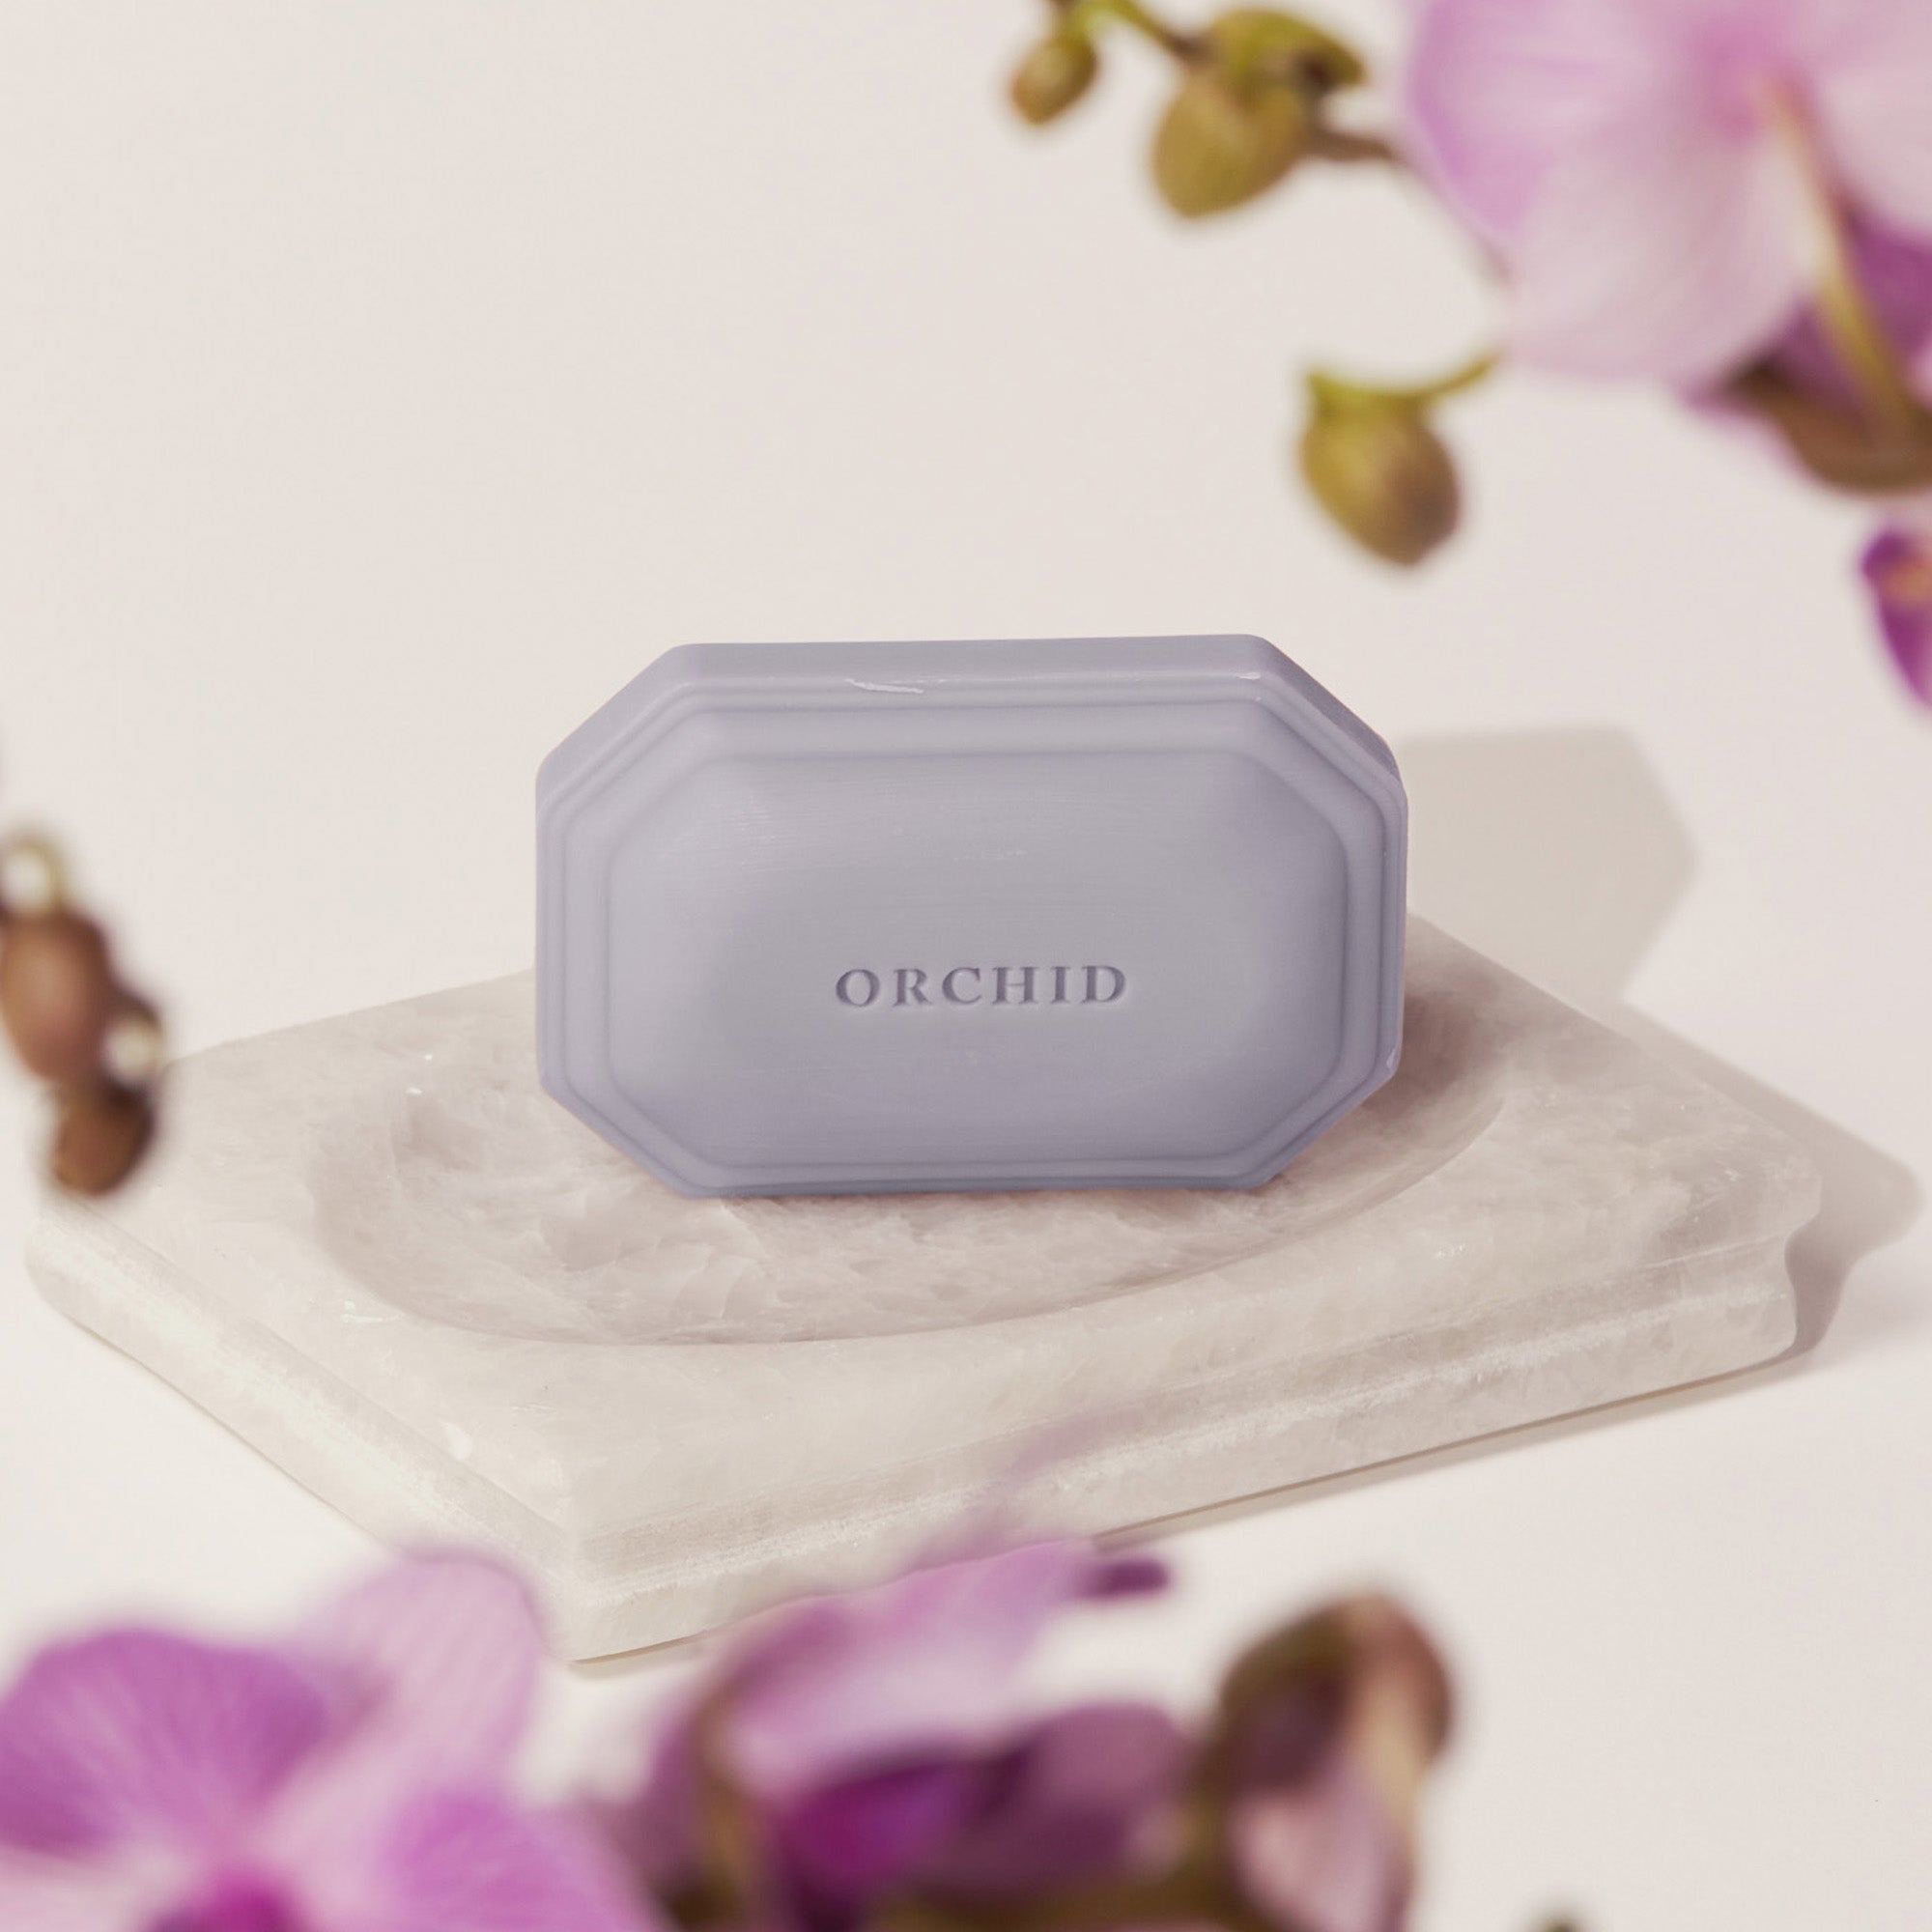 Caswell-Massey Orchid Bar Soap shown on marble soap dish with purple orchid flowers